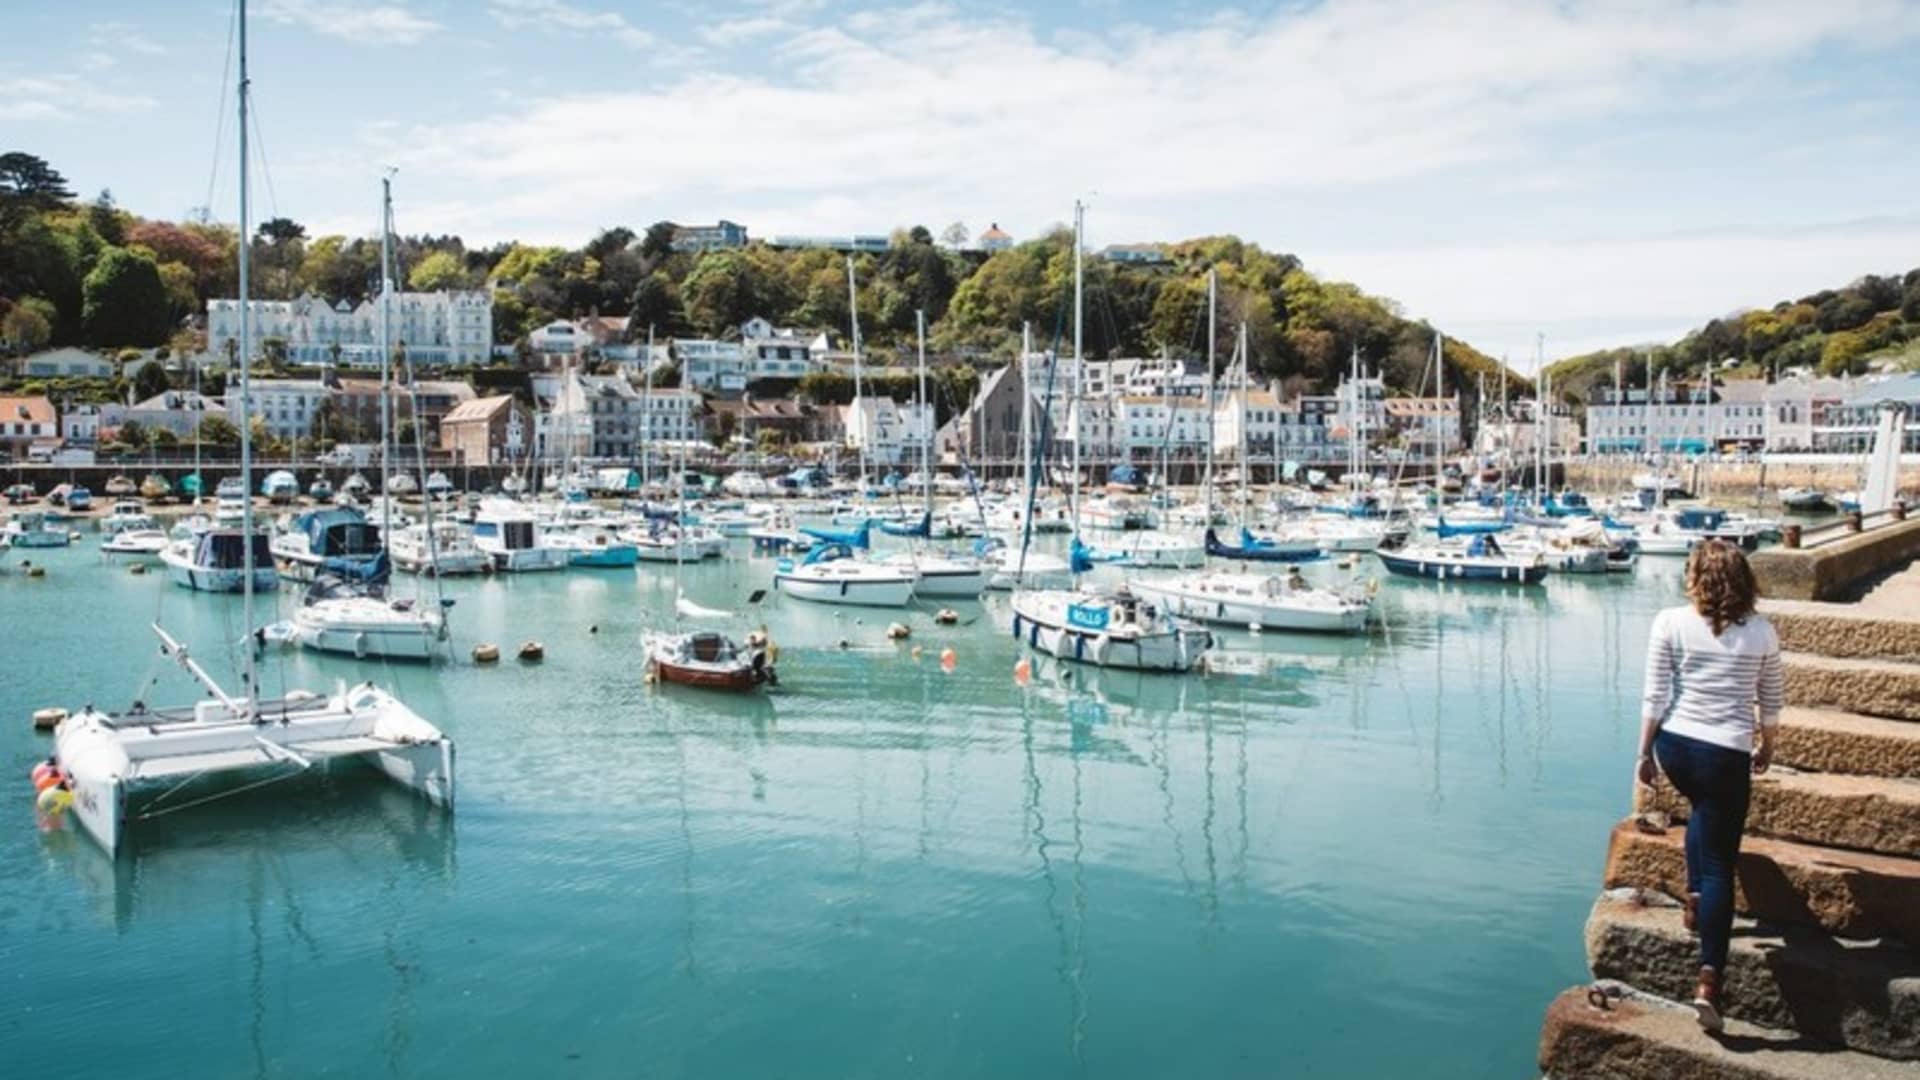 The harbor at St. Aubin, Jersey on the southwest of the island.